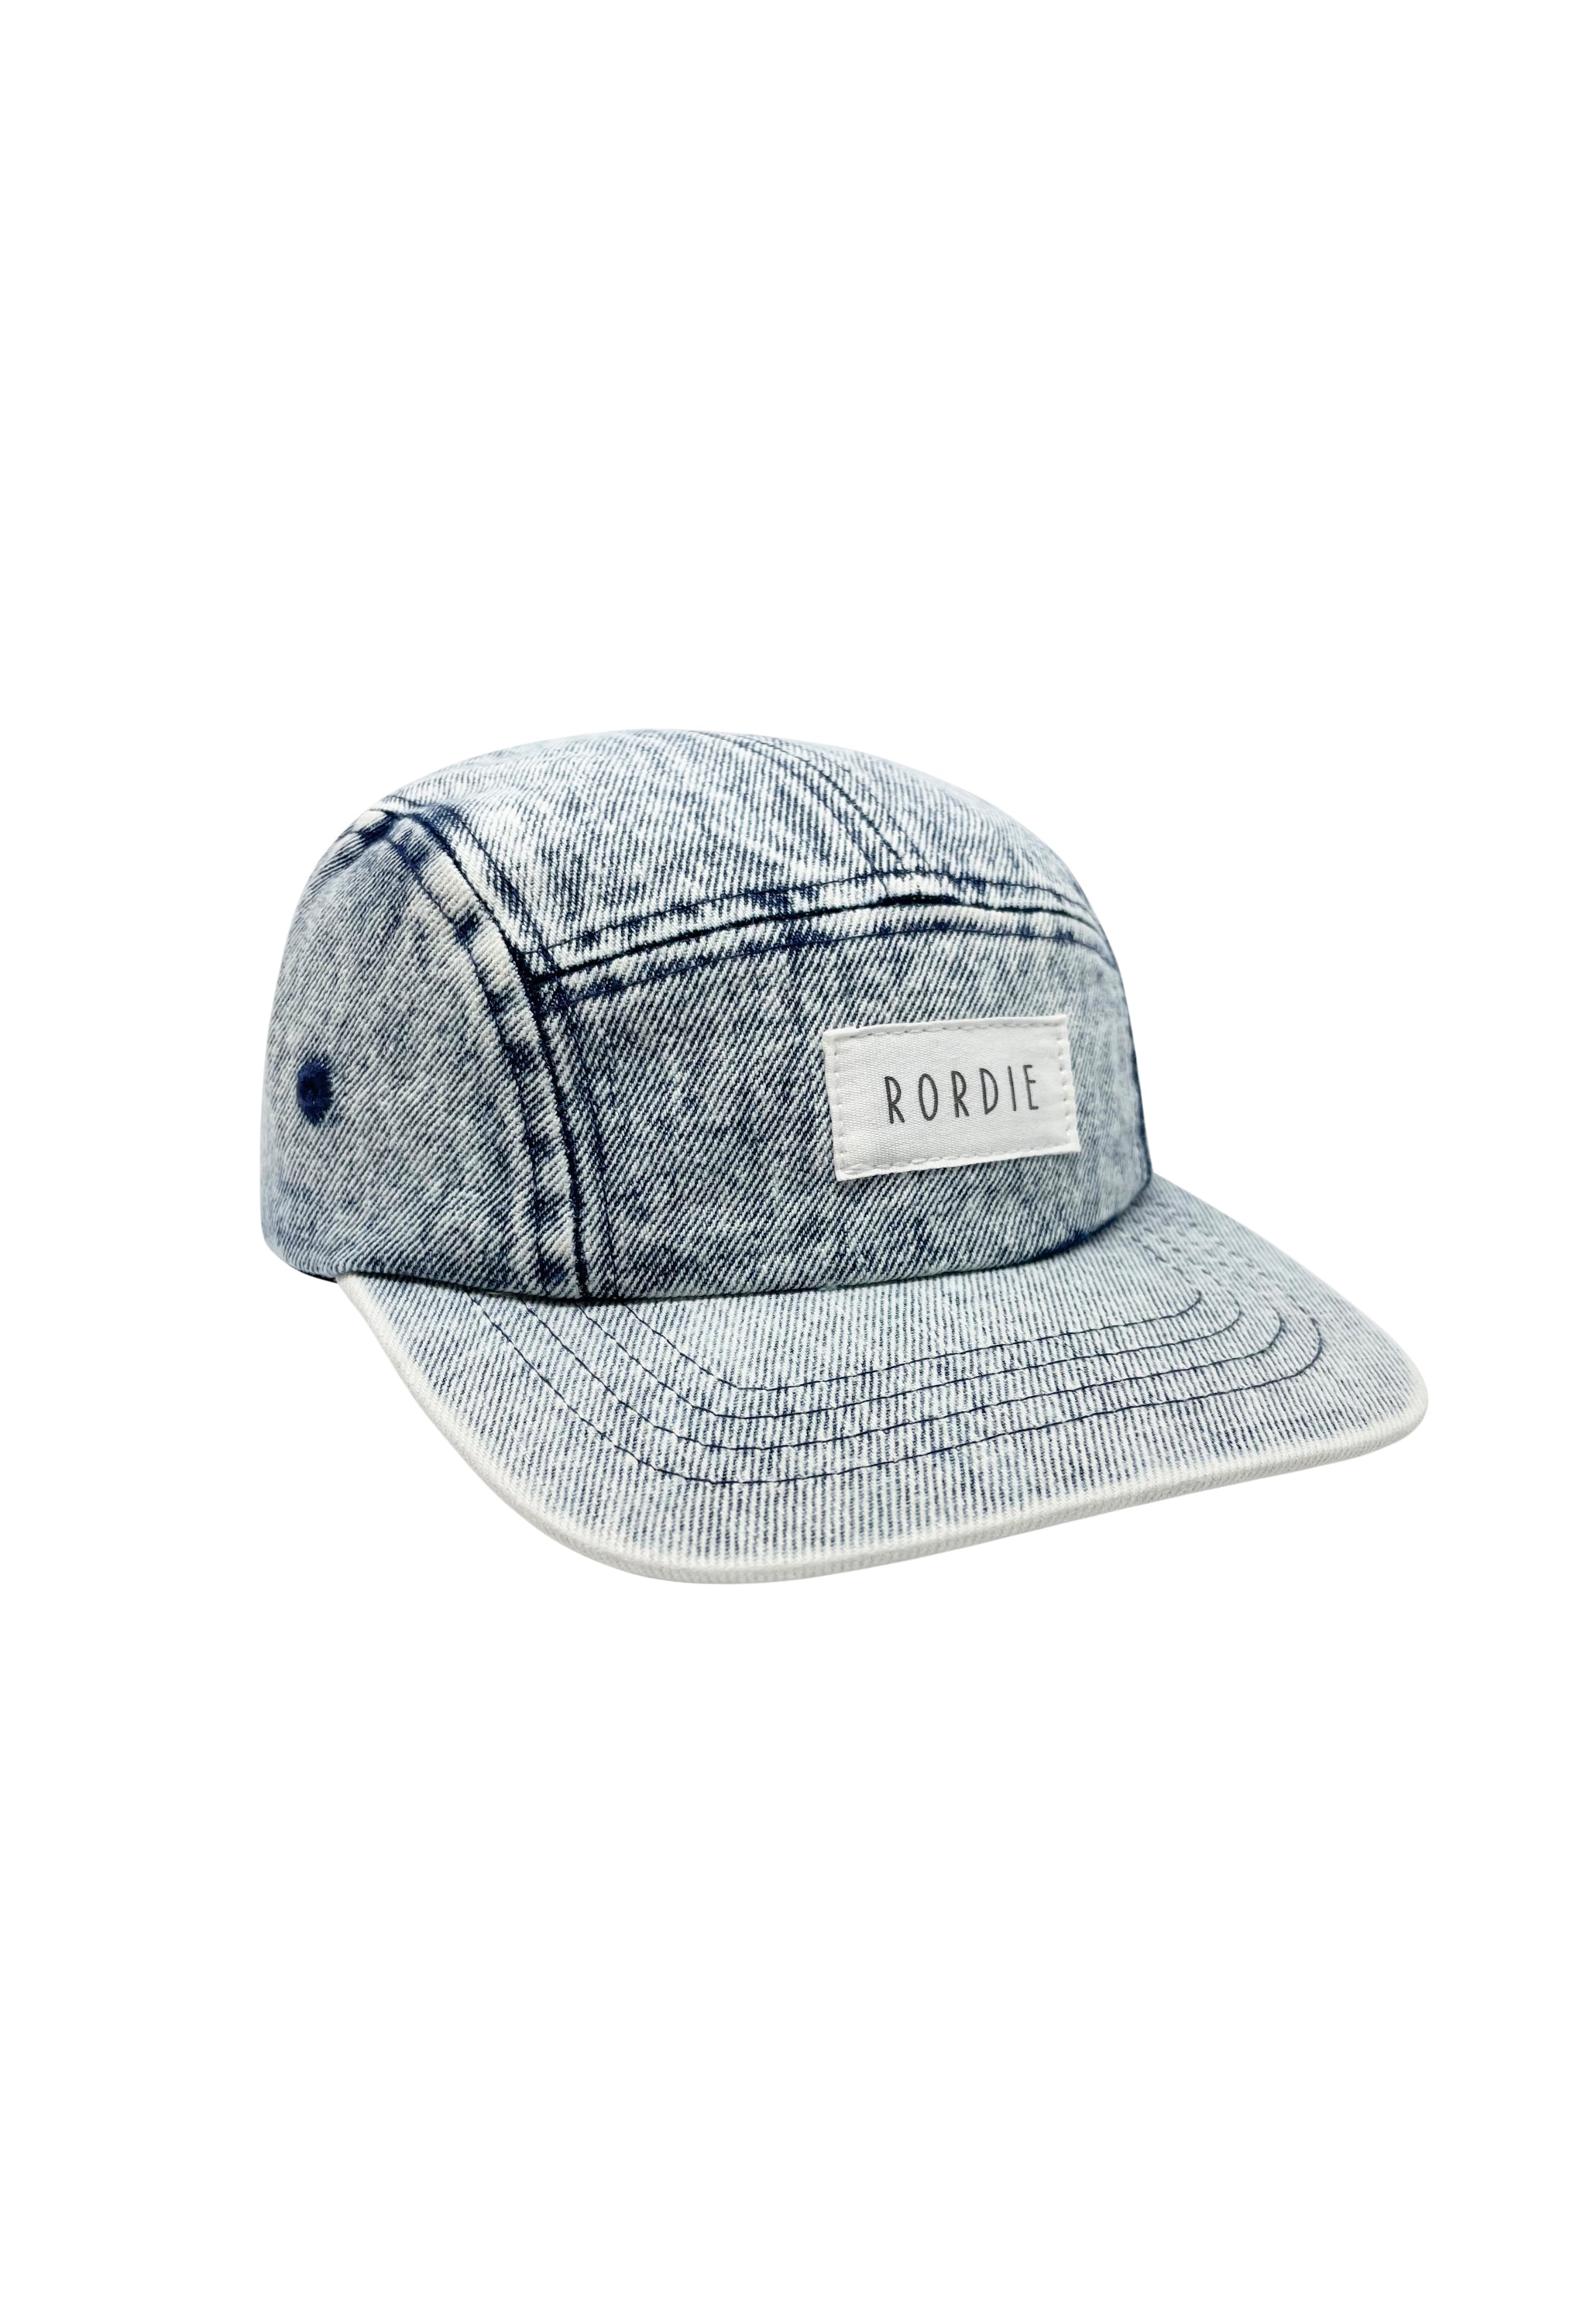 Denim Cap by Rordie in Blue ~ Baby, Toddler and Kids Hats